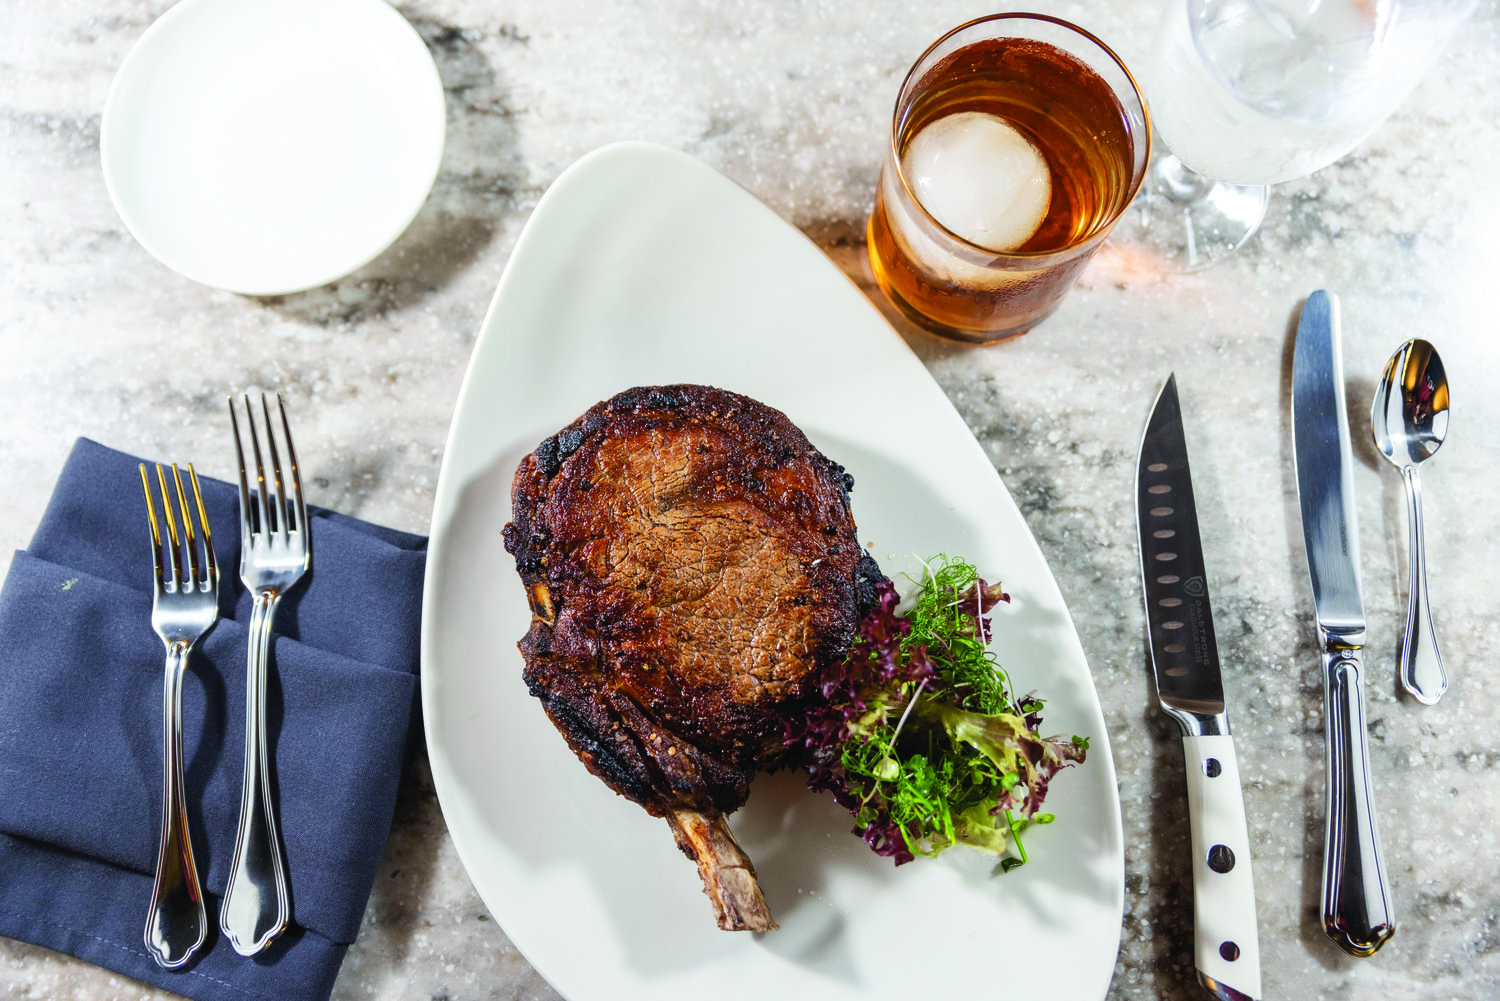 A 24-ounce dry-aged cowboy ribeye is prominent among the steak choices at Oldestone.